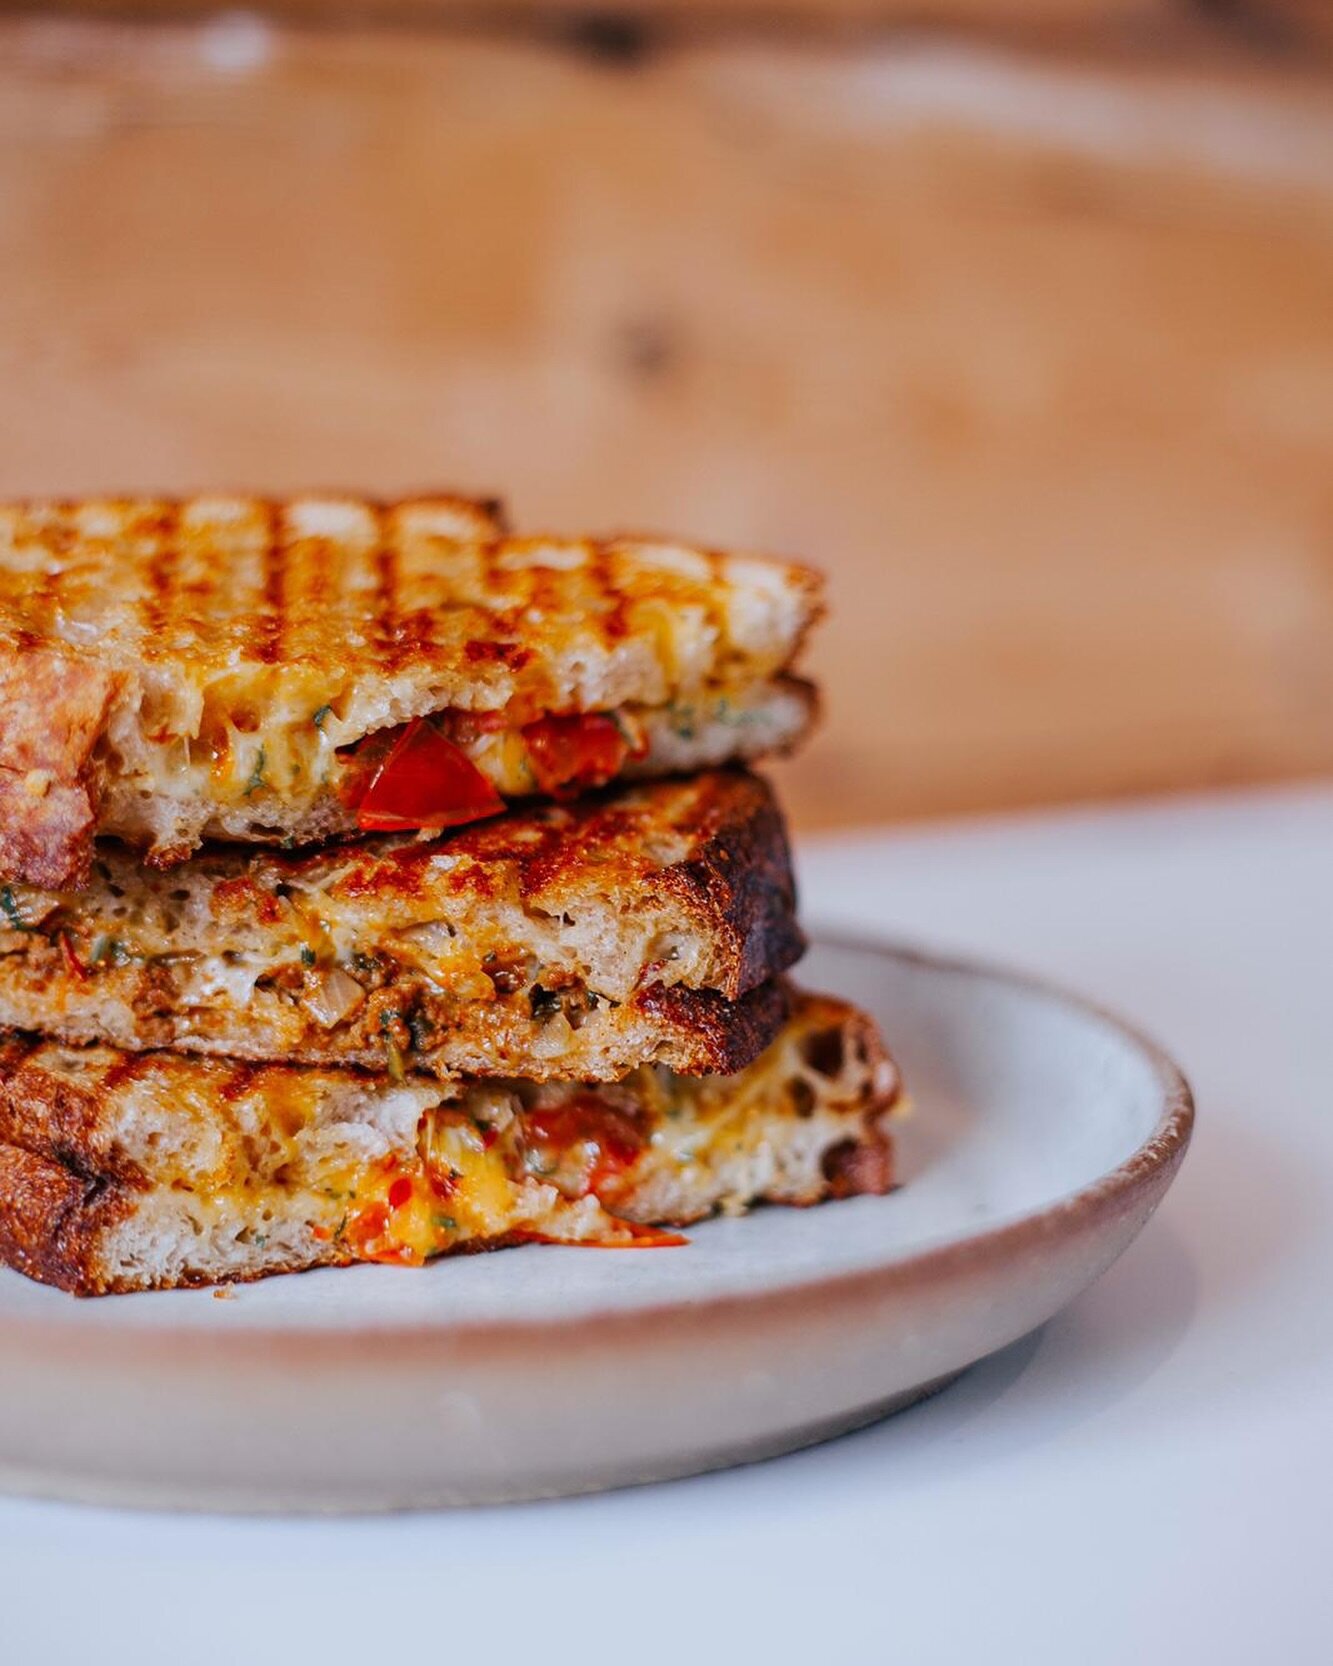 Cheese &amp; Gone &bull; 2 Week Warning &bull; Bye Bye Toasties

Toasties have had their part since the start, and all good things must come to an end. 

Our new menu is incoming mid-April and the &lsquo;best toasties in Cornwall&rsquo; will make way